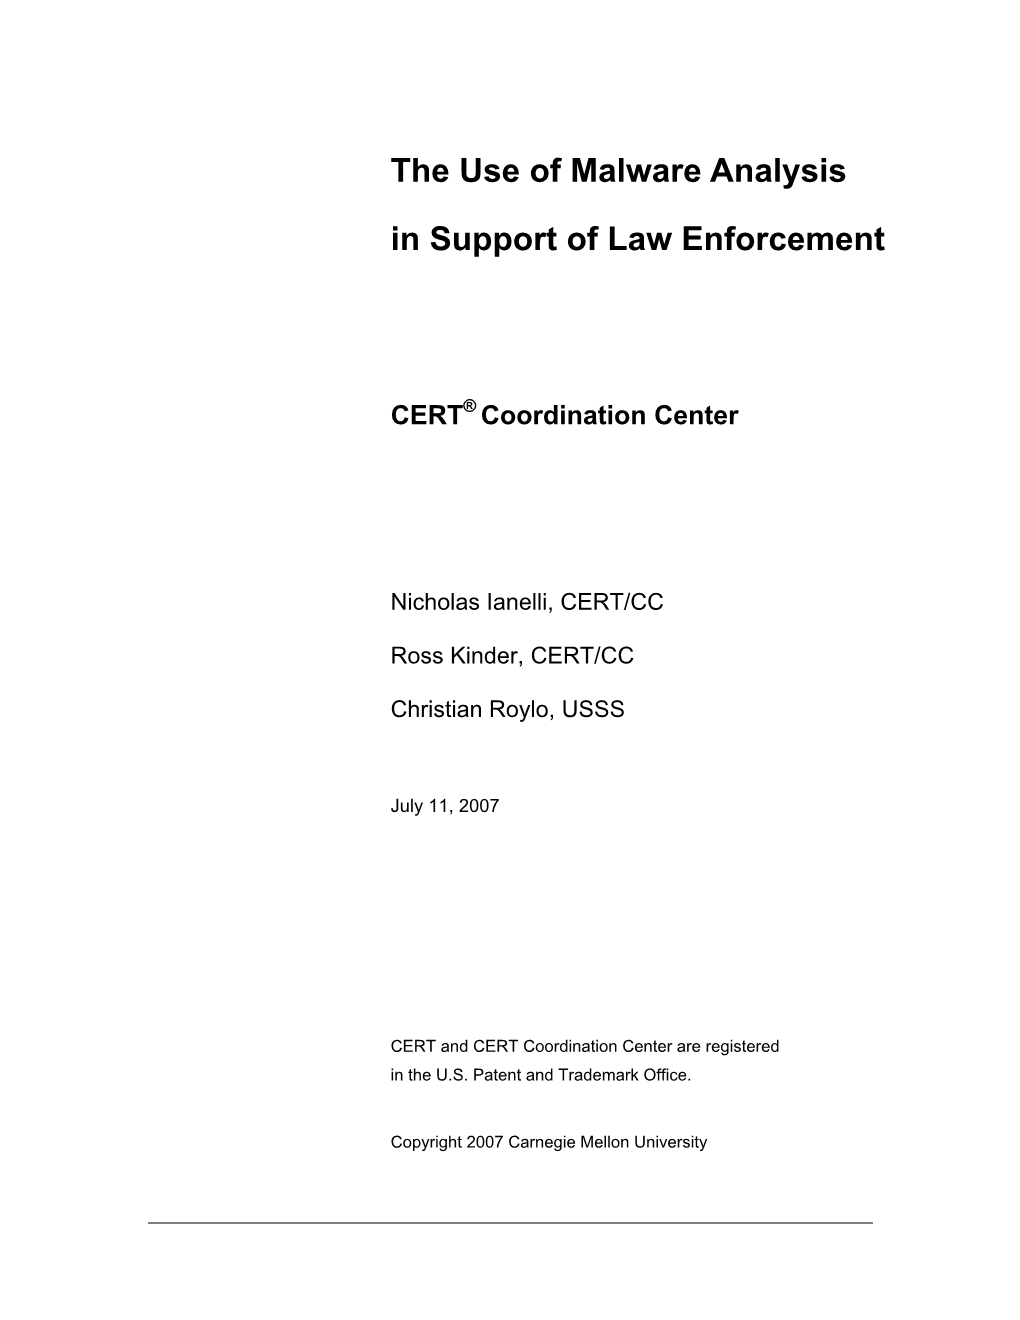 The Use of Malware Analysis in Support of Law Enforcement